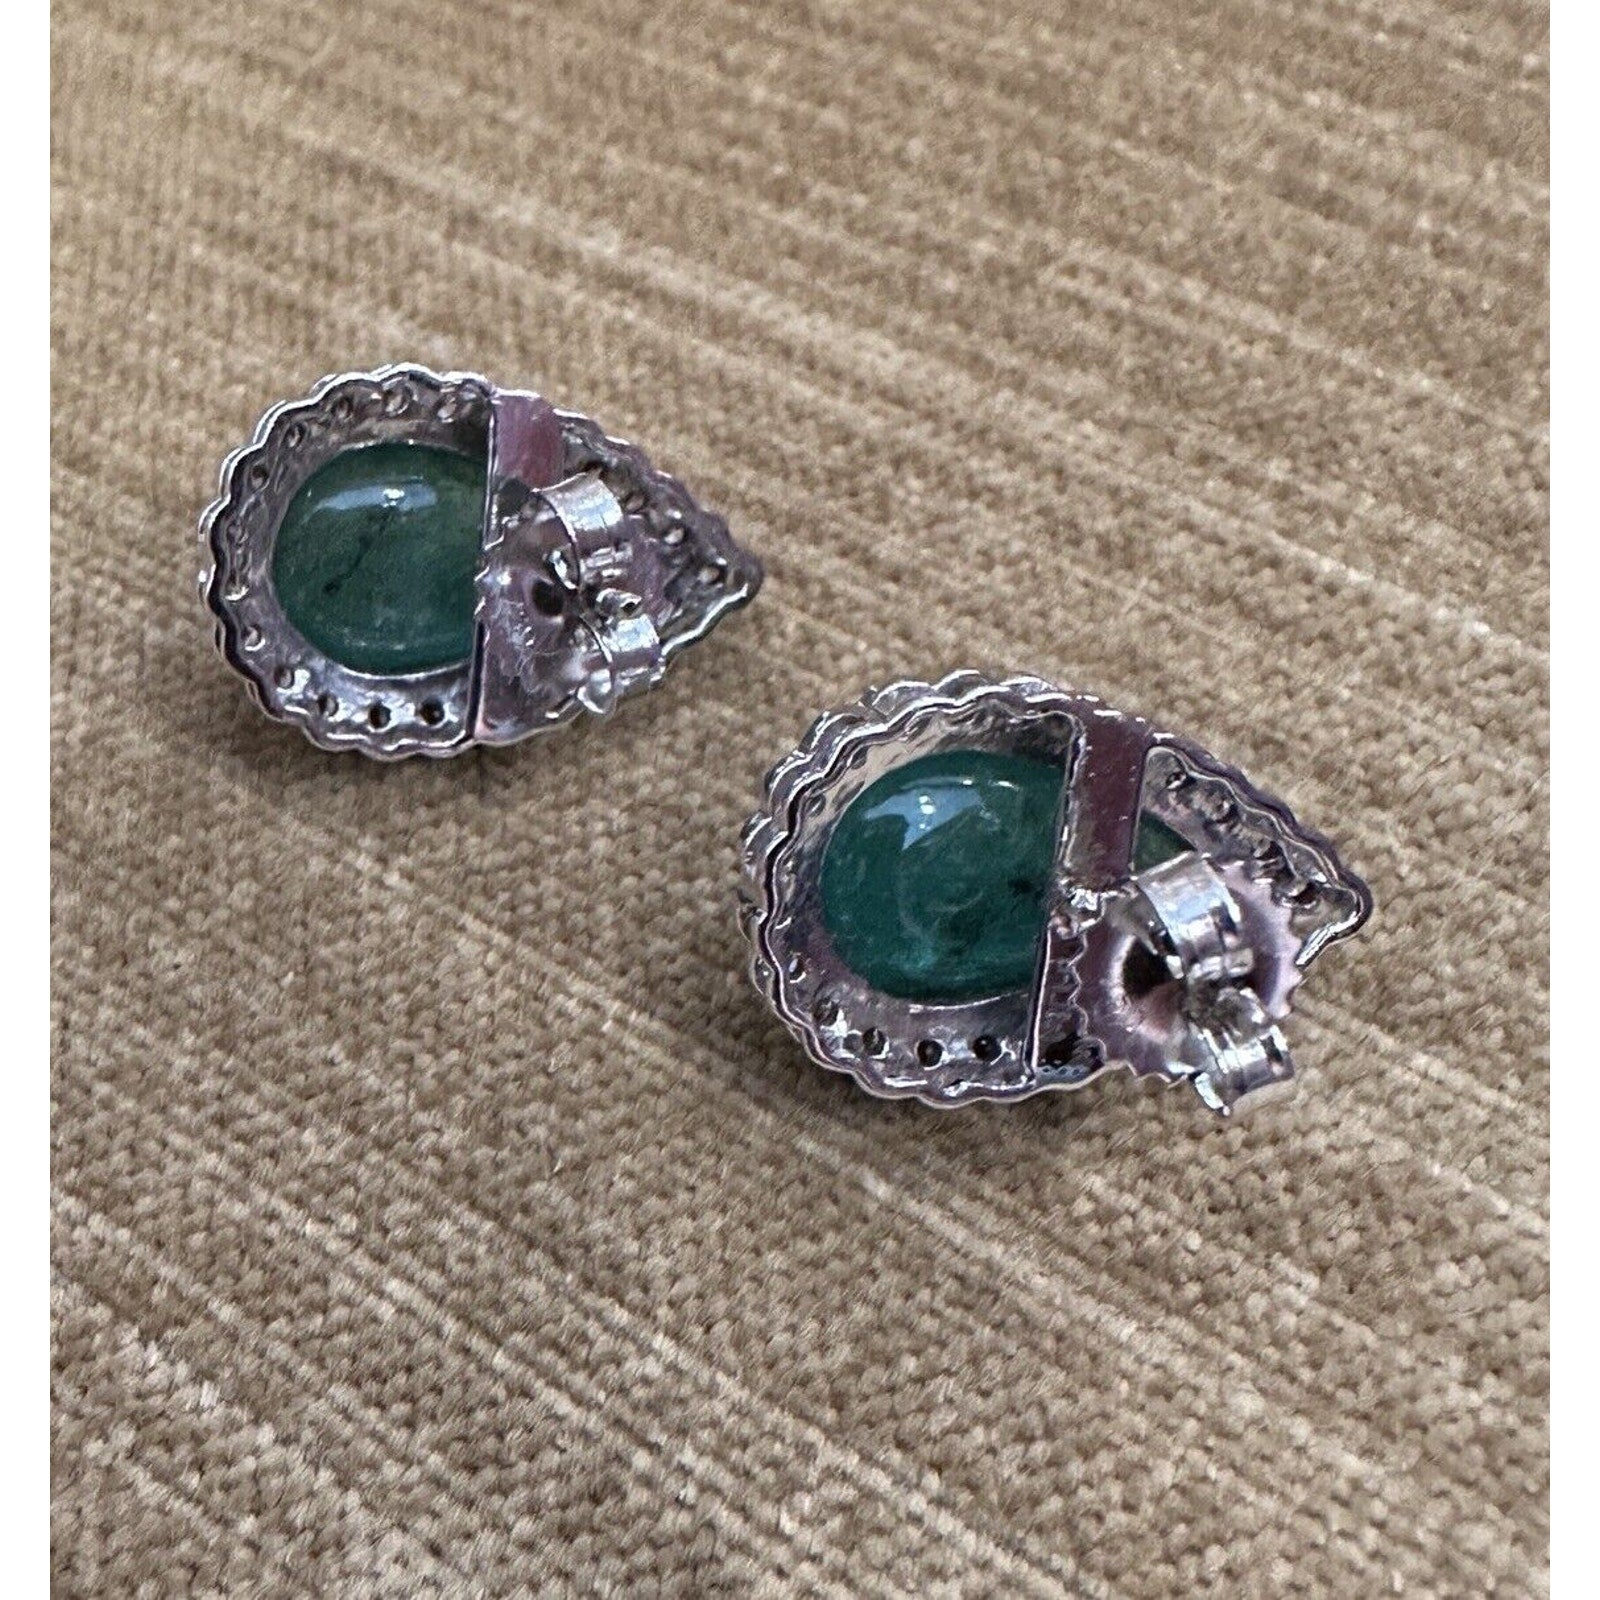 Emerald Cabochon Earrings with Diamonds in 18k White Gold